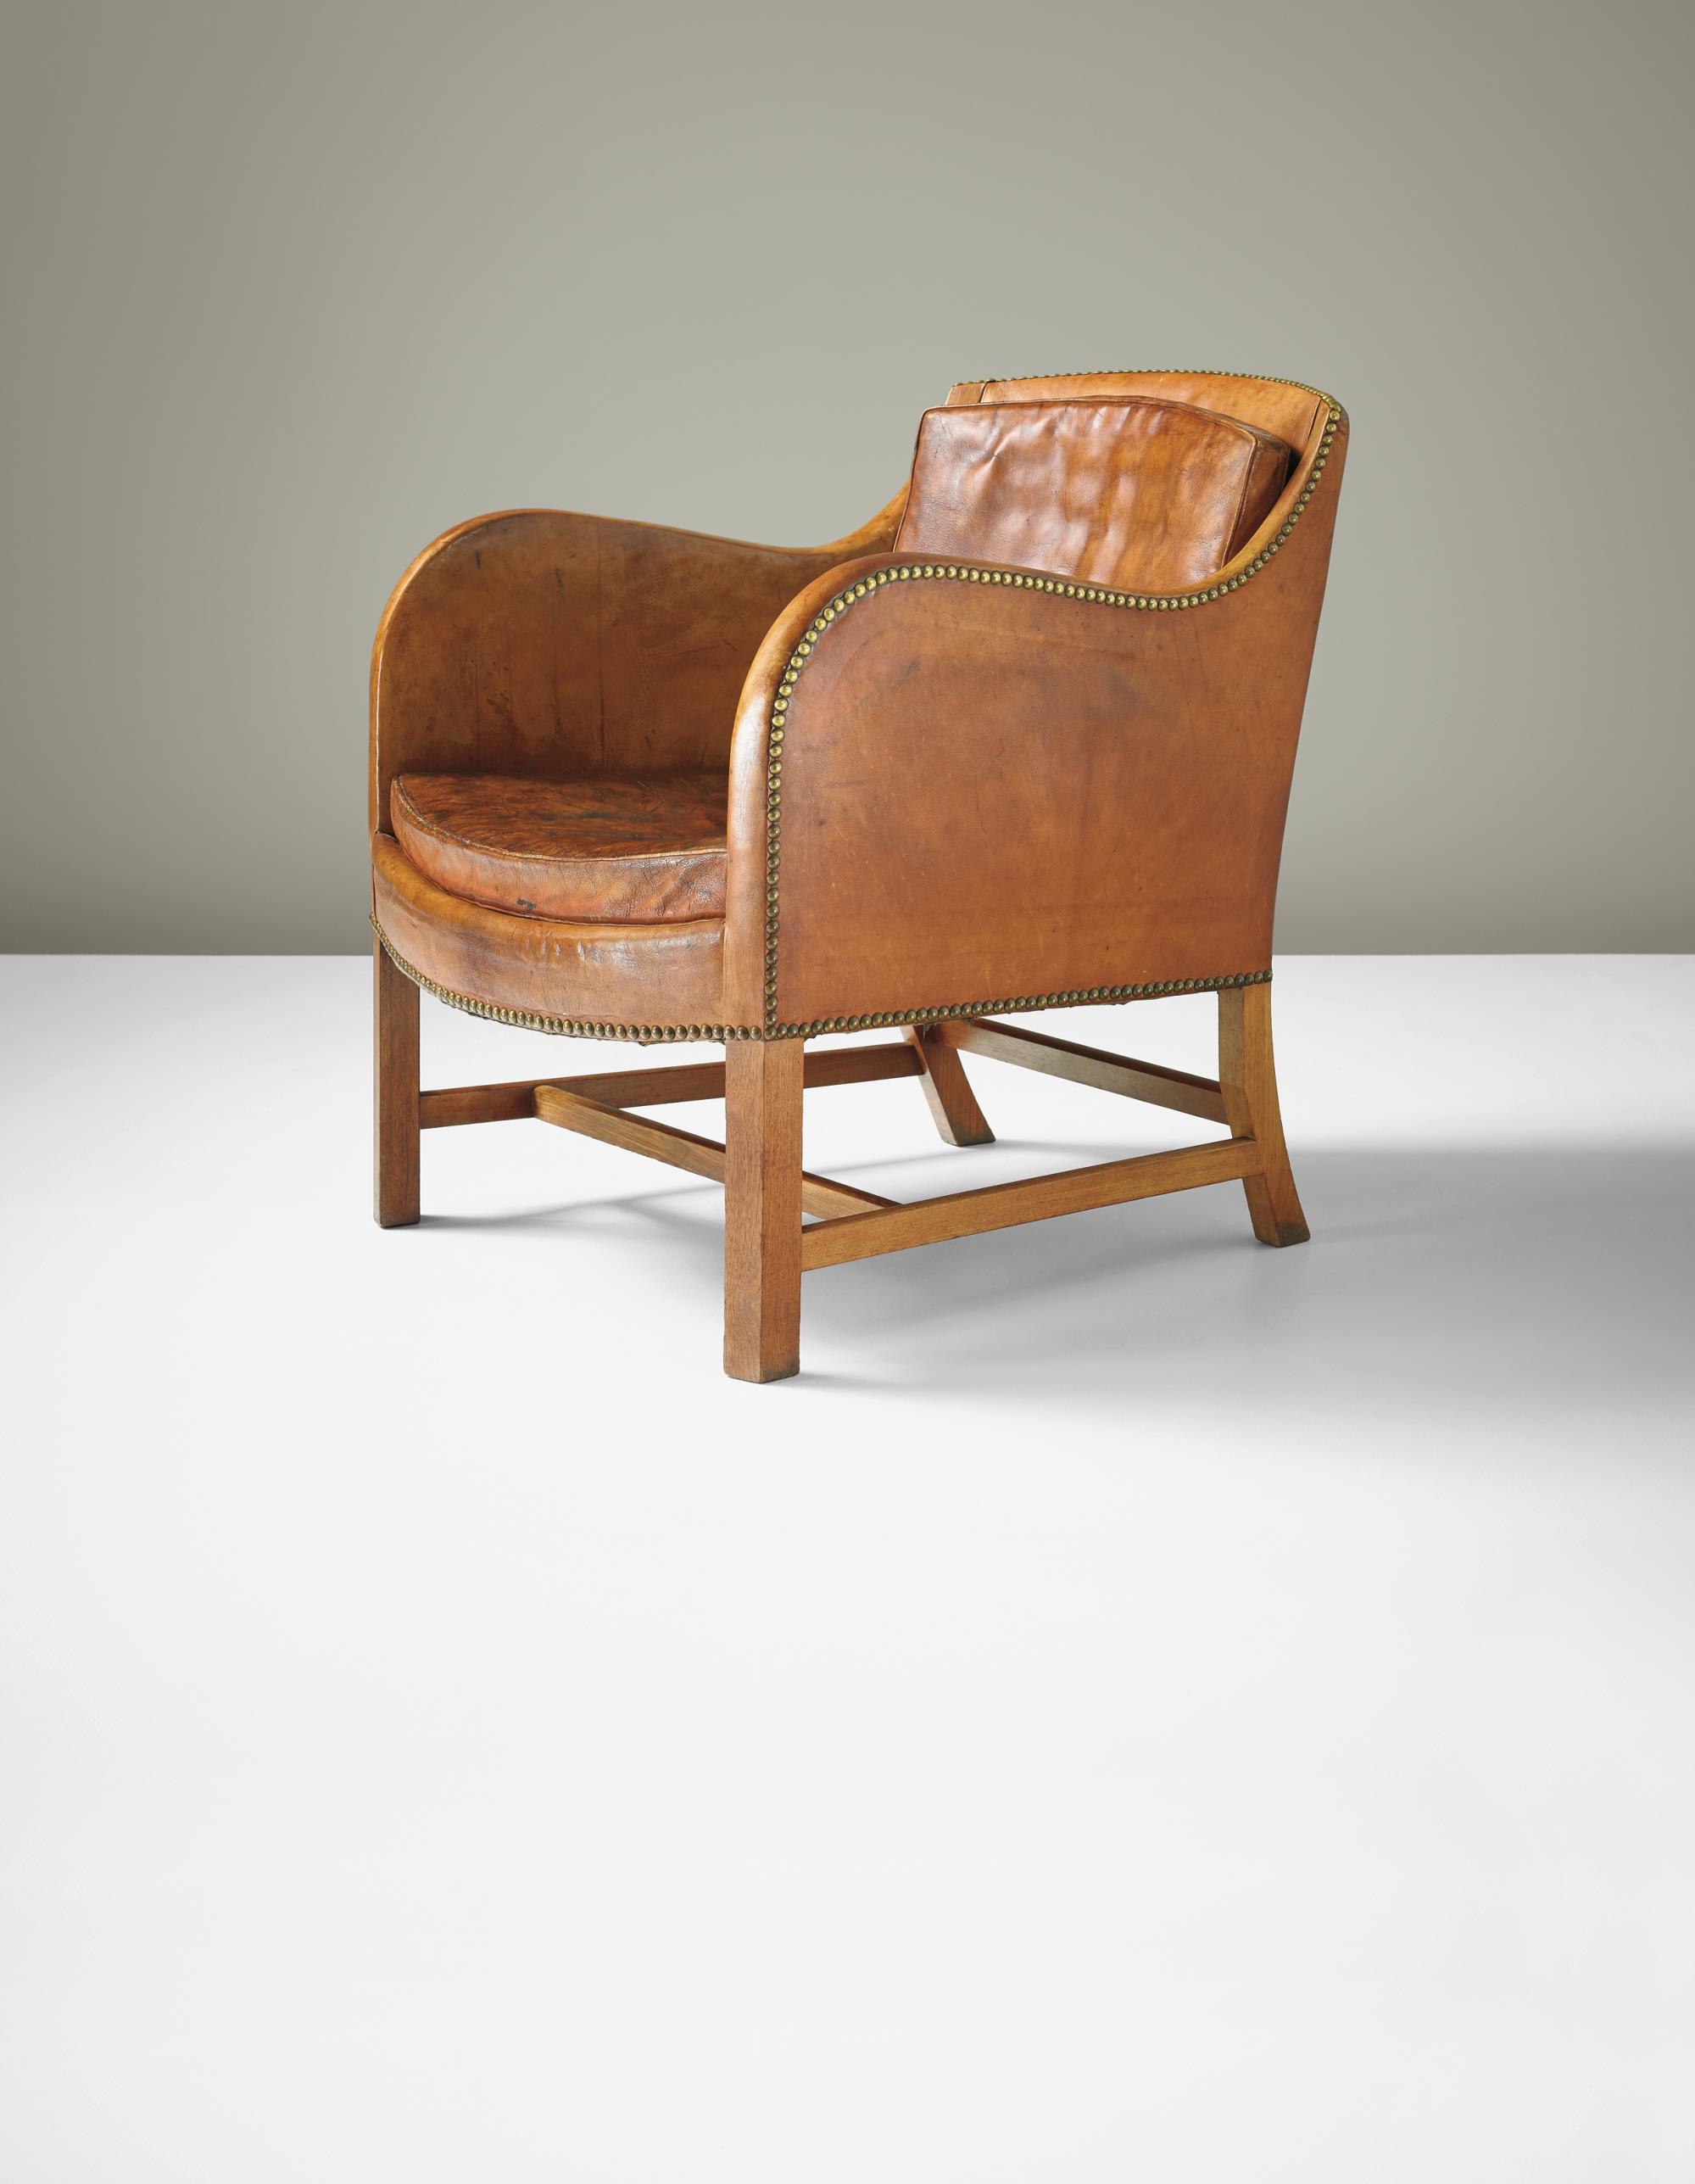 Klint Pair of 'Mix' chairs, model no. 4396 (1930) |